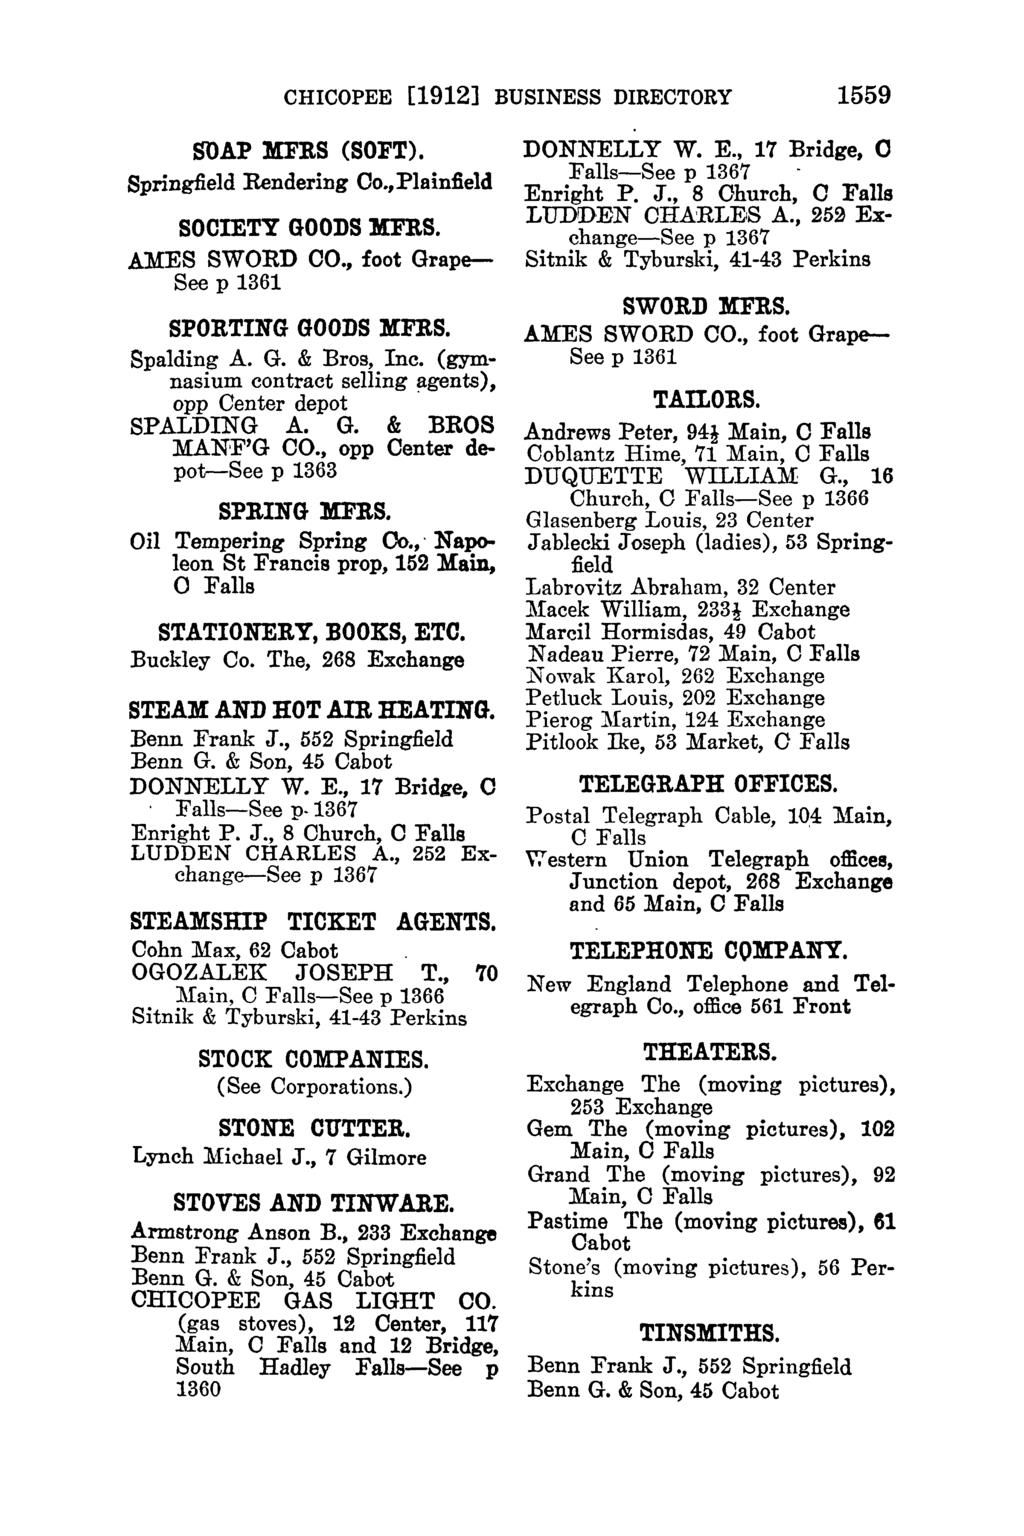 CHICOPEE [1912] BUSINESS DIRECTORY 1559 SOAP DRS (SOFT). Springfield Rendering Oo.,Plainfield SOCIETY GOODS MFRS. AMES SWORD 00., foot Grape See p 1361 SPORTING GOODS l'rifrs. Spalding A. G. & Bros, Inc.